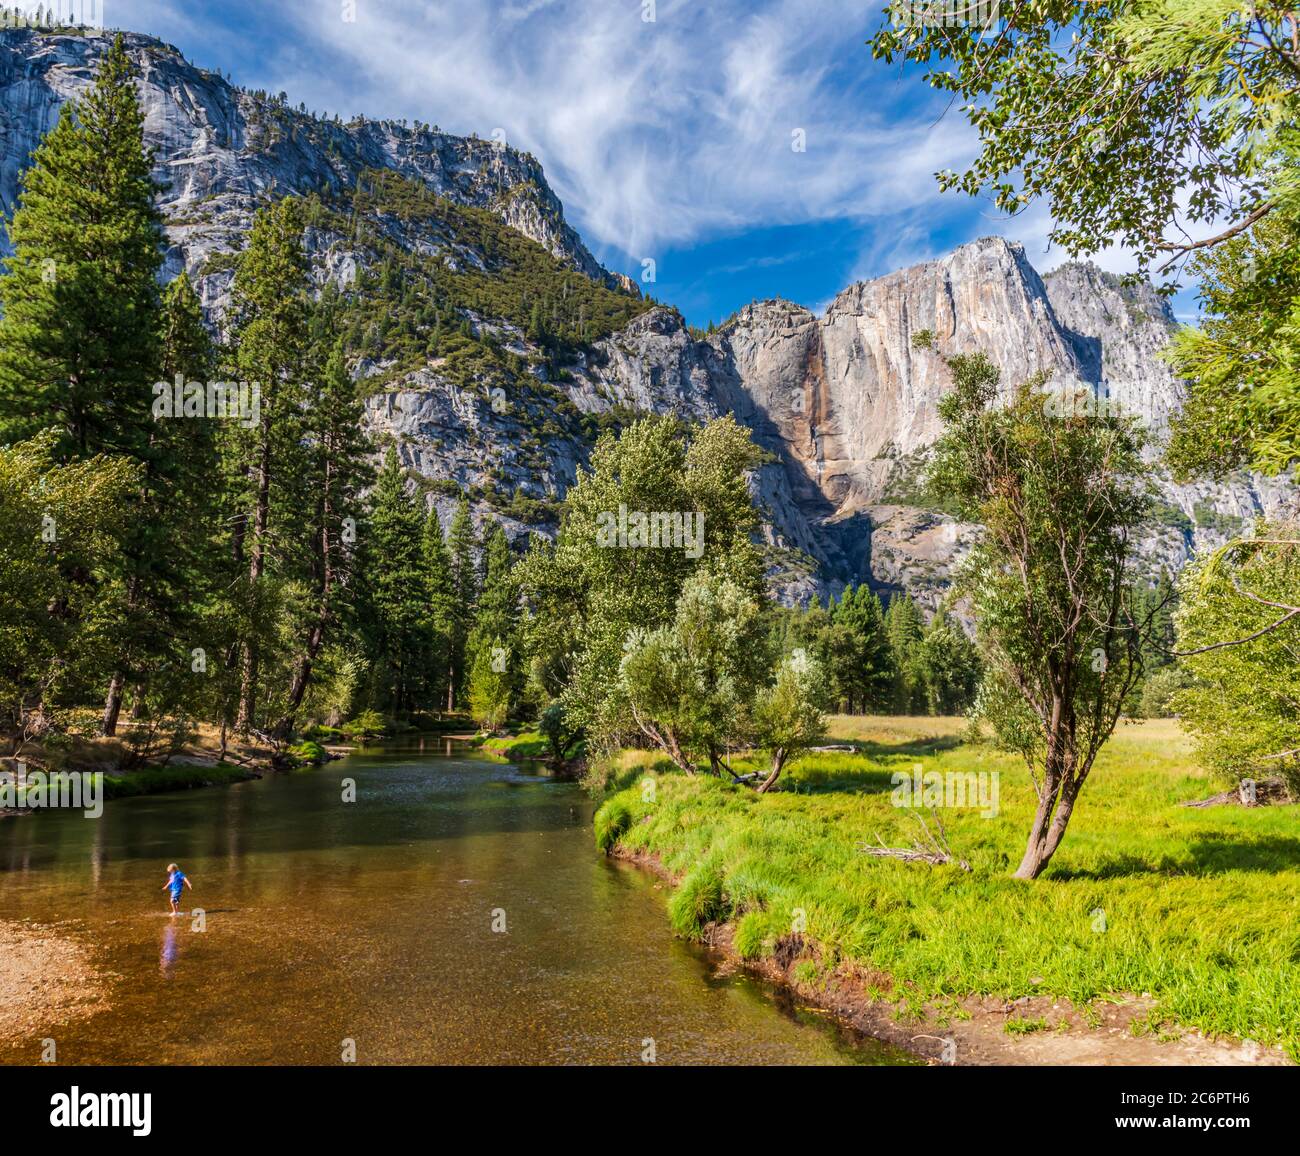 A child is playing in the waters of the Merced River as it flows through Yosemite Valley and the canyon walls form a grand backdrop. Stock Photo